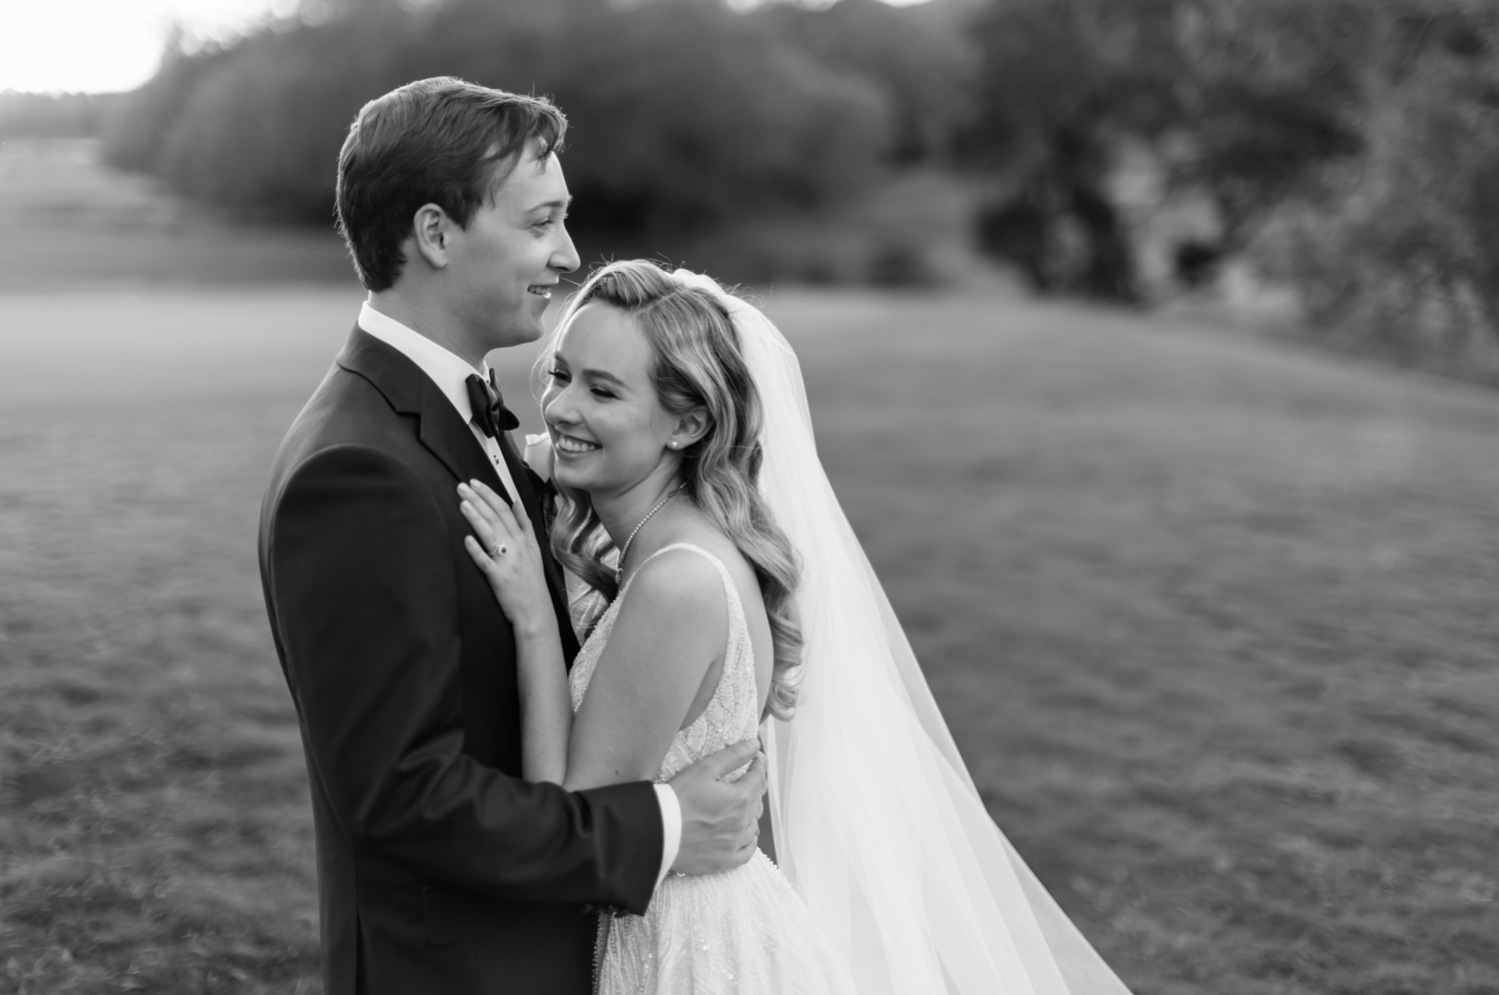 Left: The bride and groom hug and laugh on the golf course during their portraits